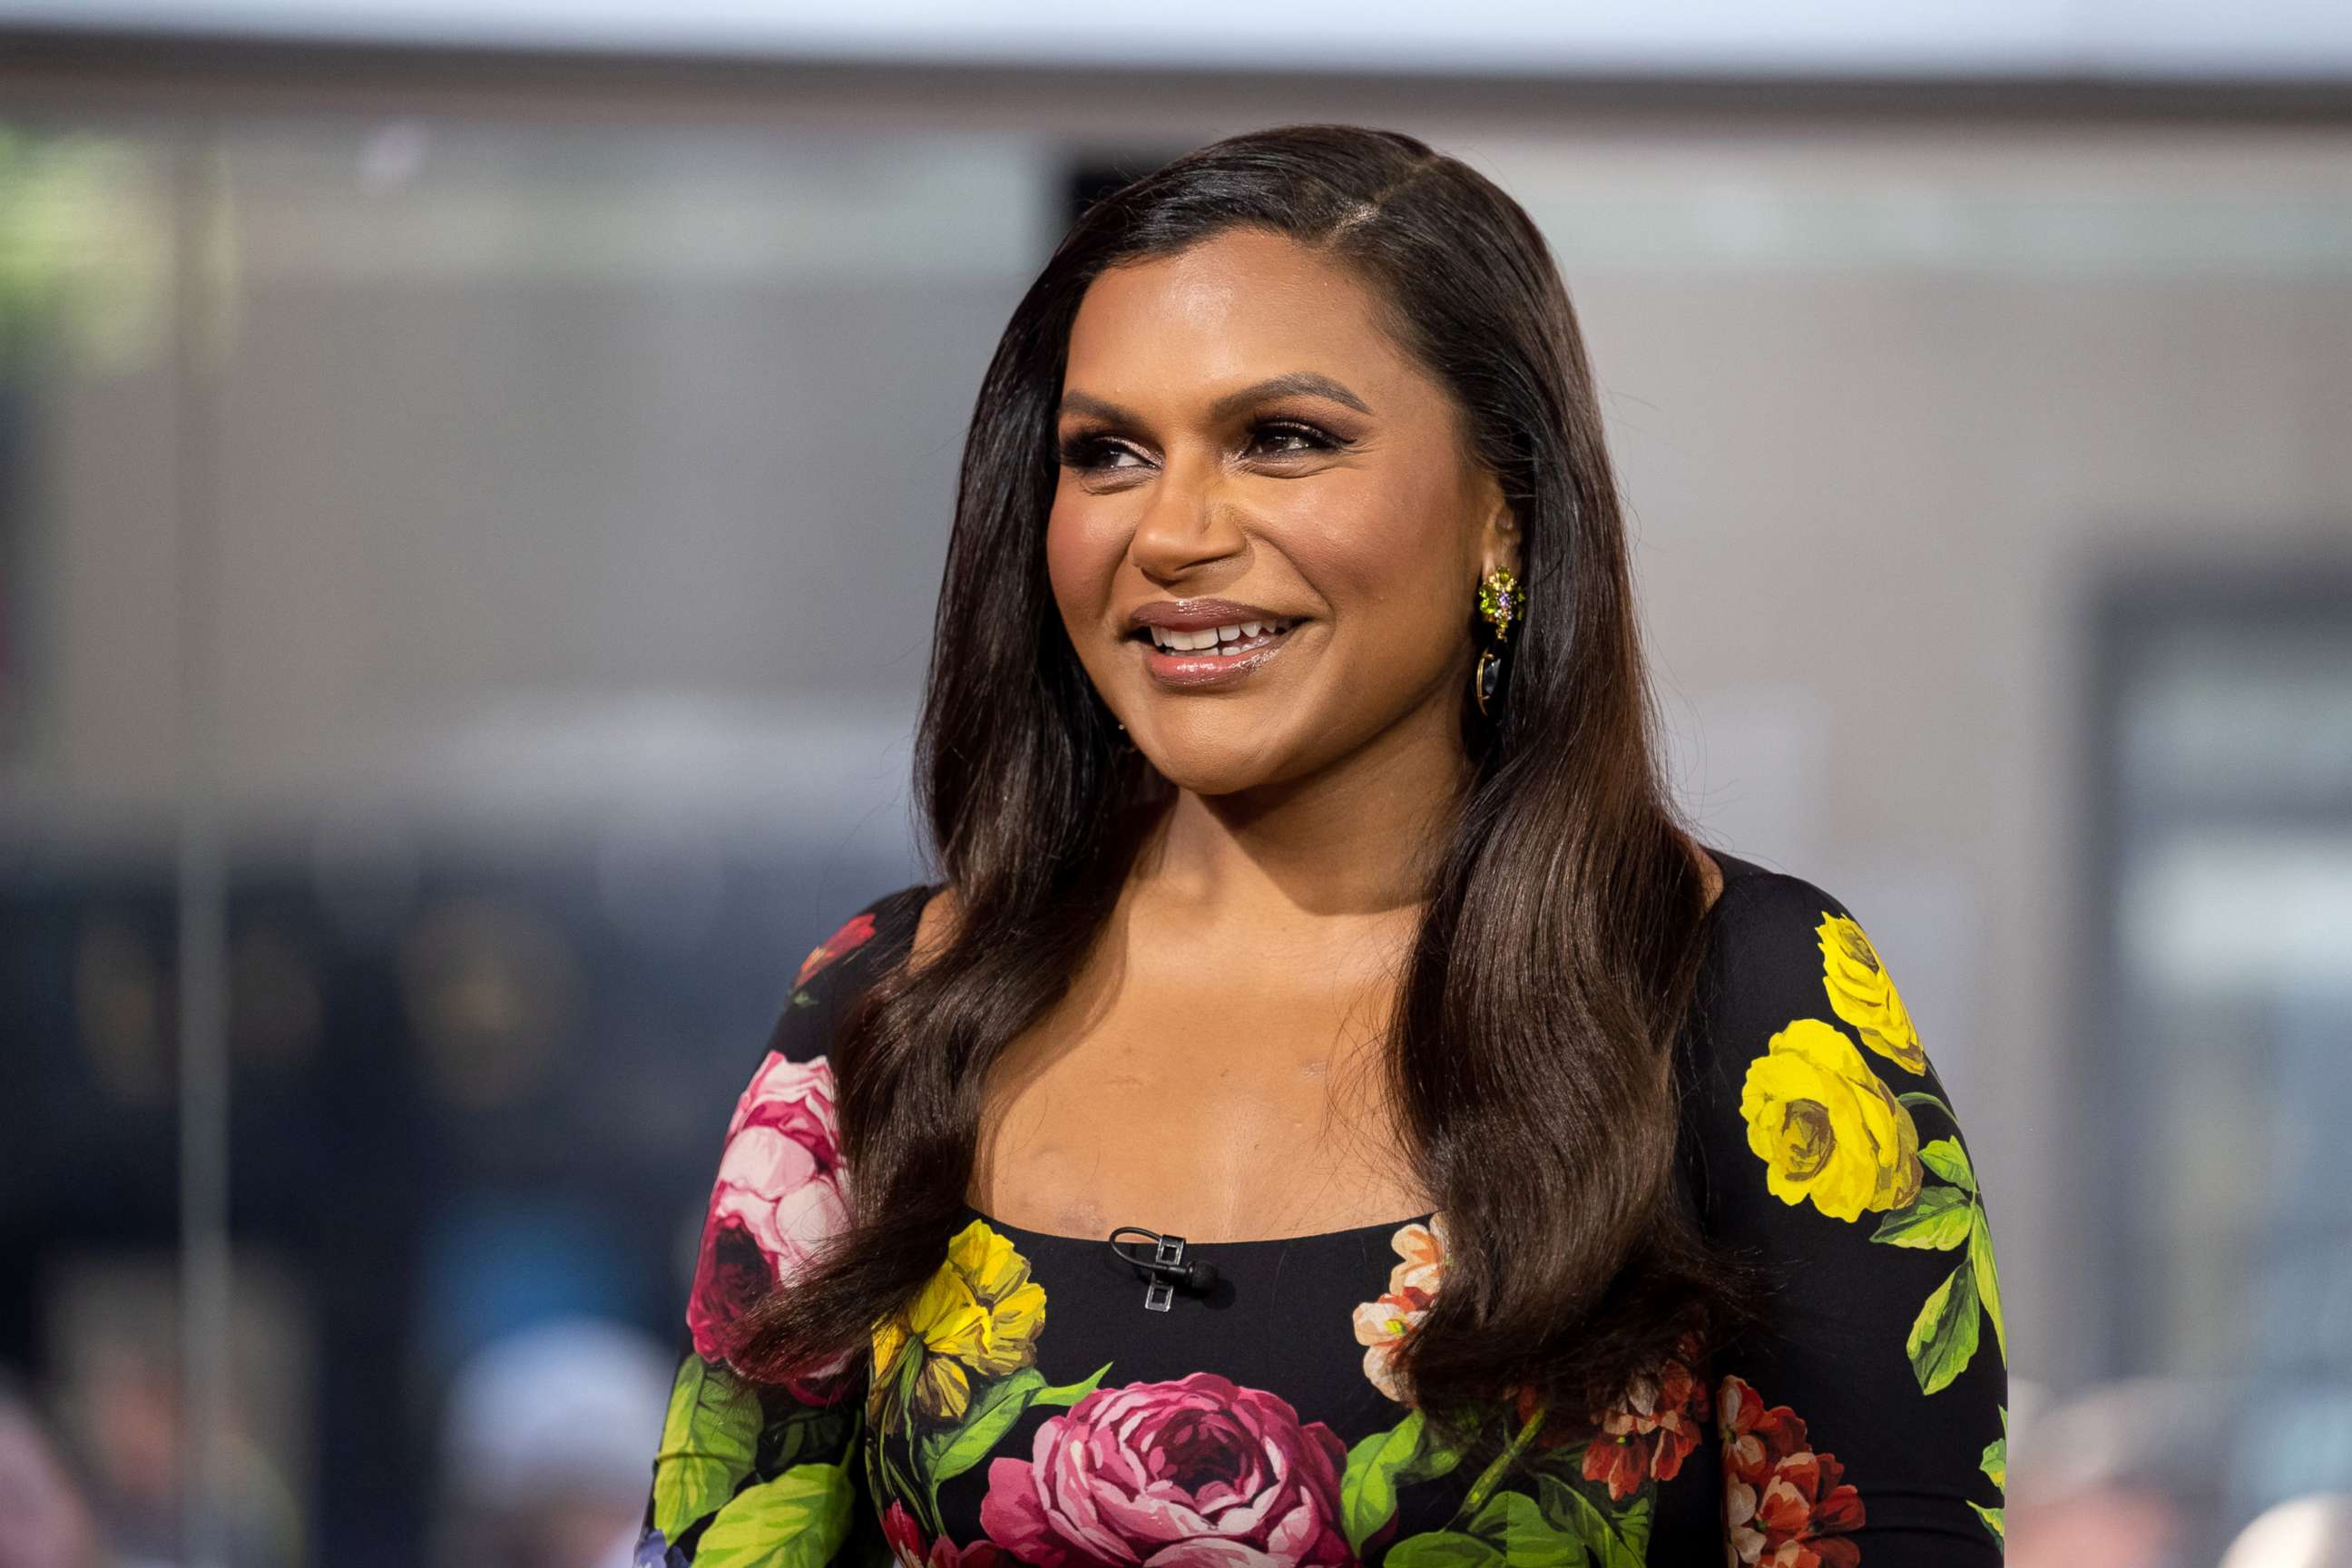 PHOTO: Mindy Kaling appears on the "Today" show on Aug. 9, 2022.